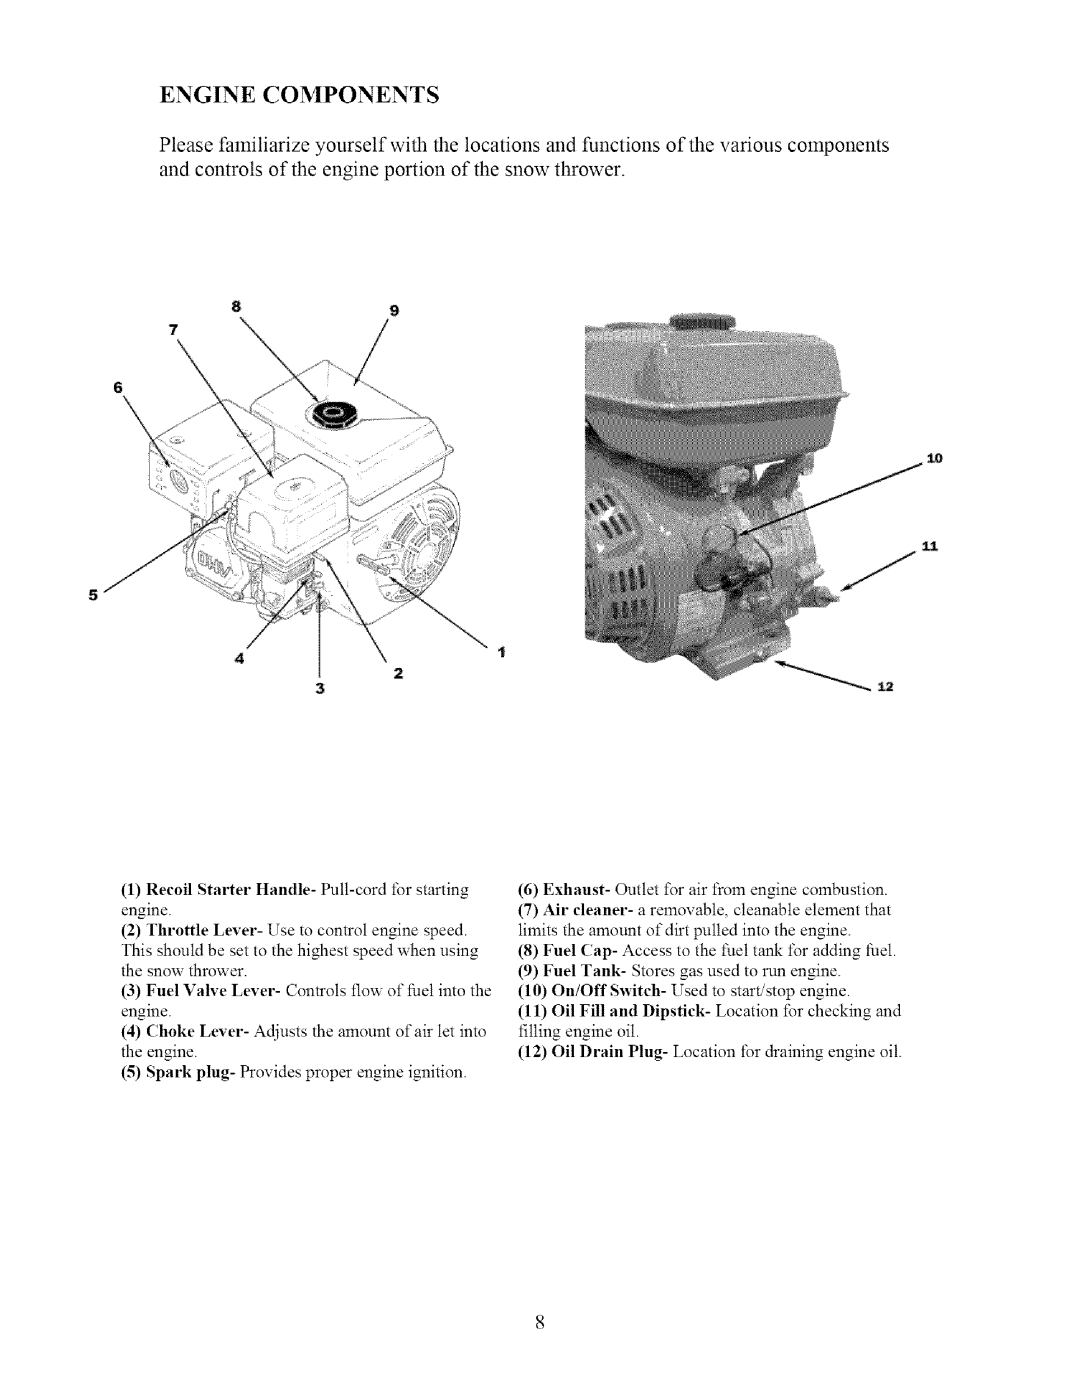 Sears 270-3250 owner manual Engine Components 